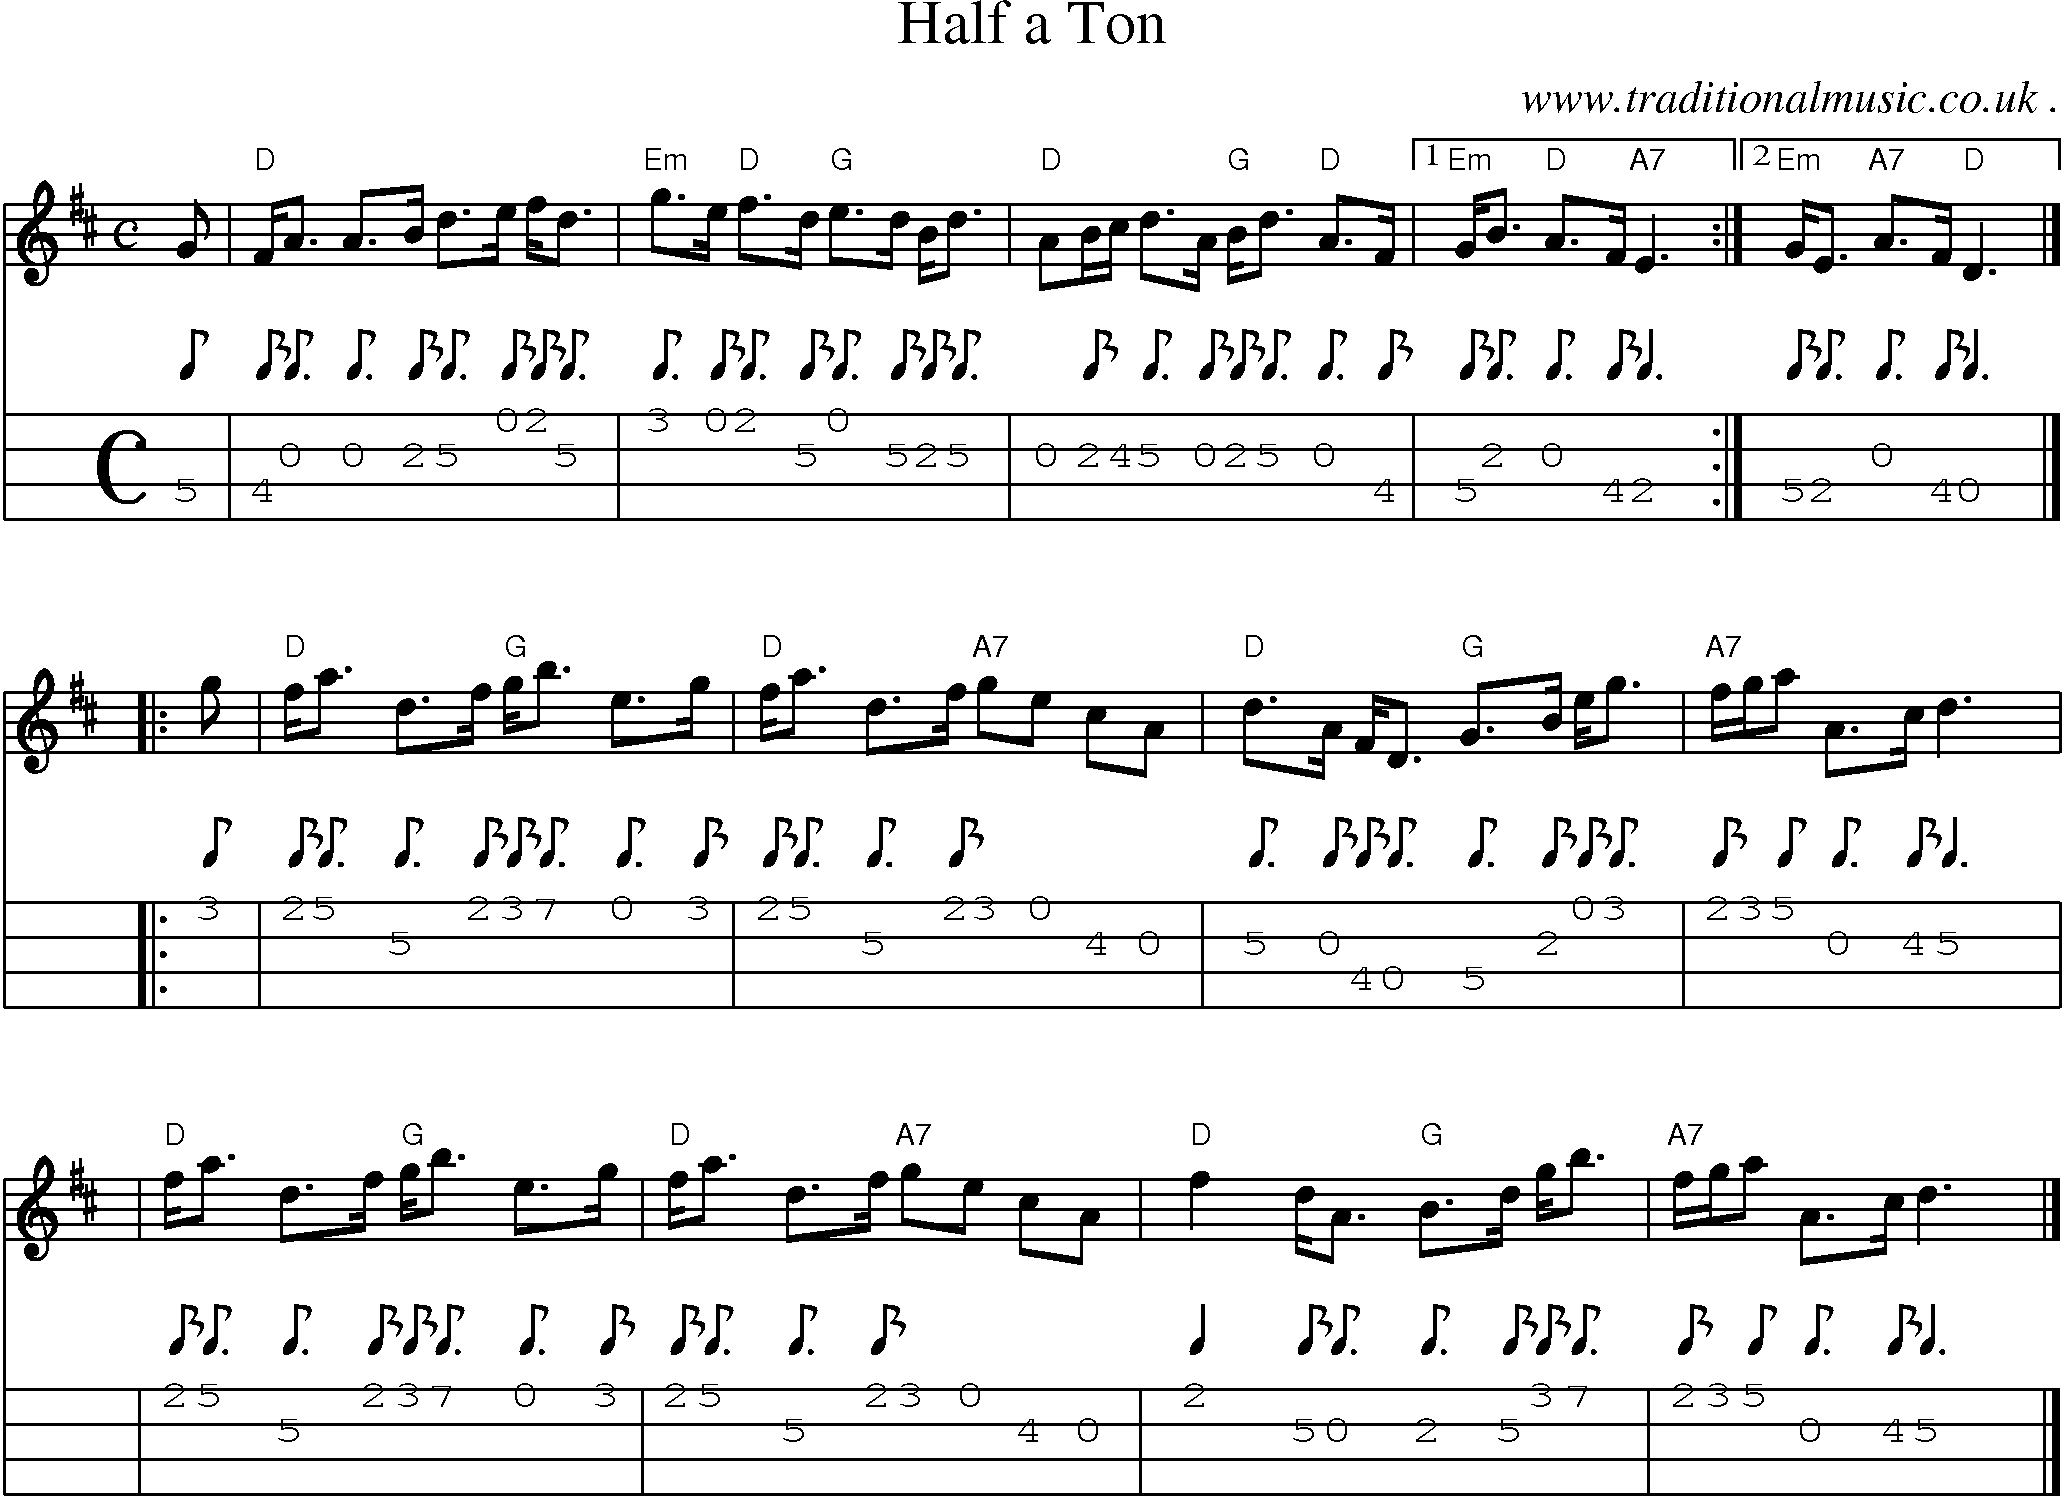 Sheet-music  score, Chords and Mandolin Tabs for Half A Ton